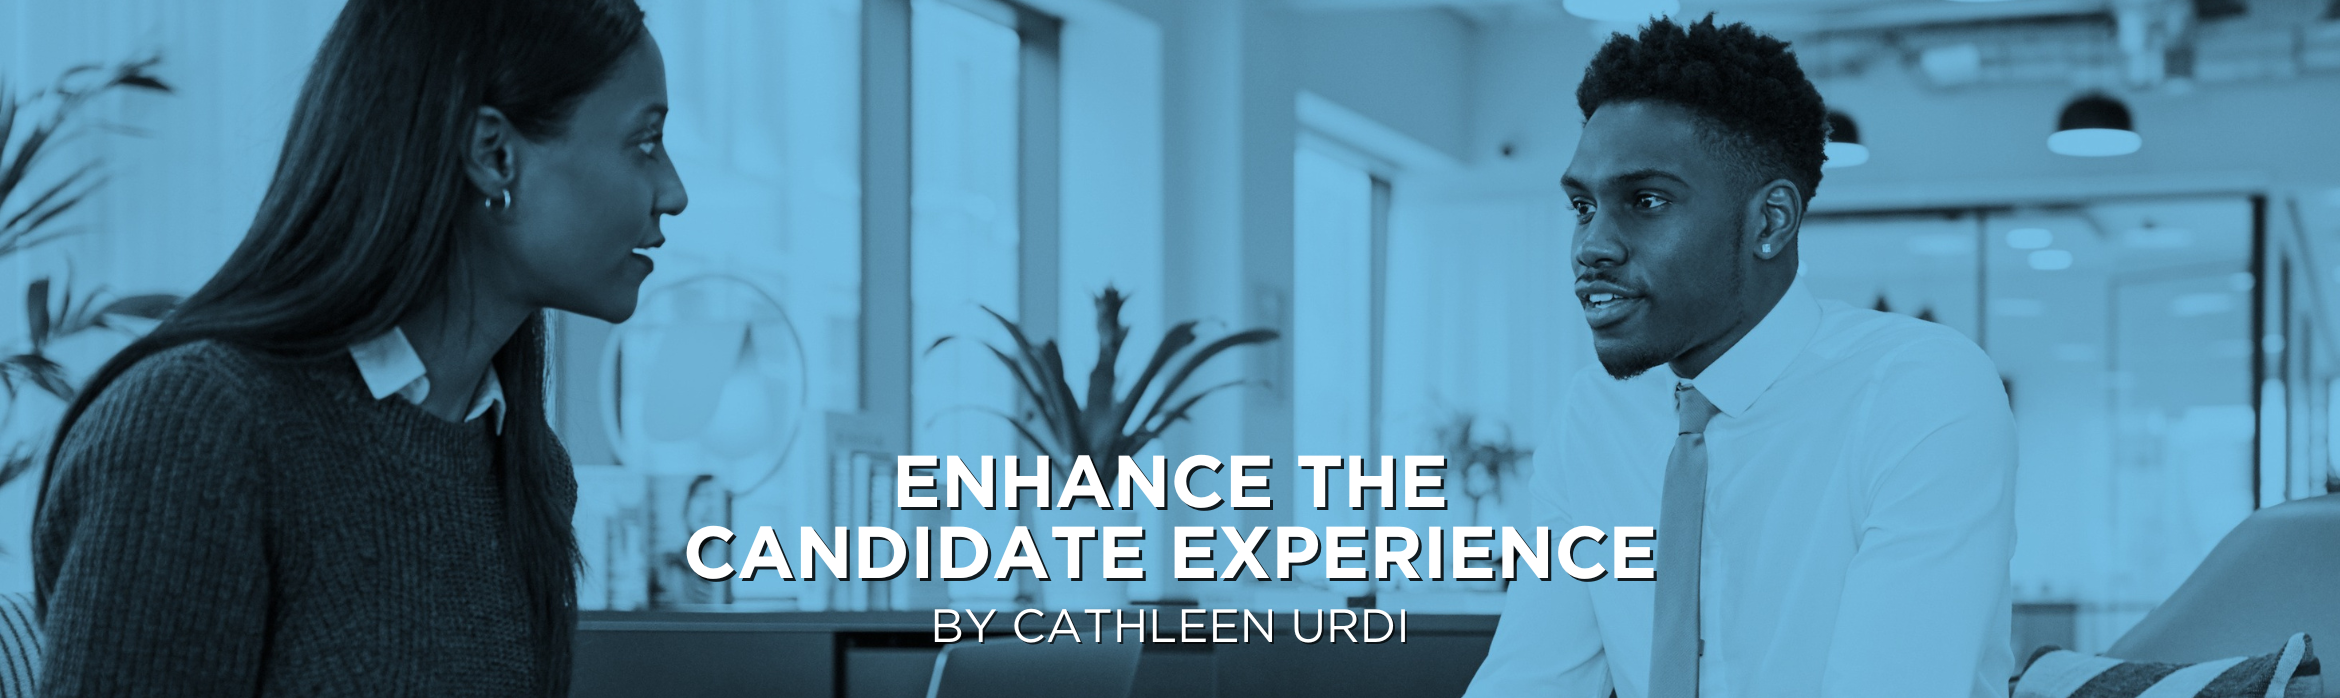 Enhance the Candidate Experience